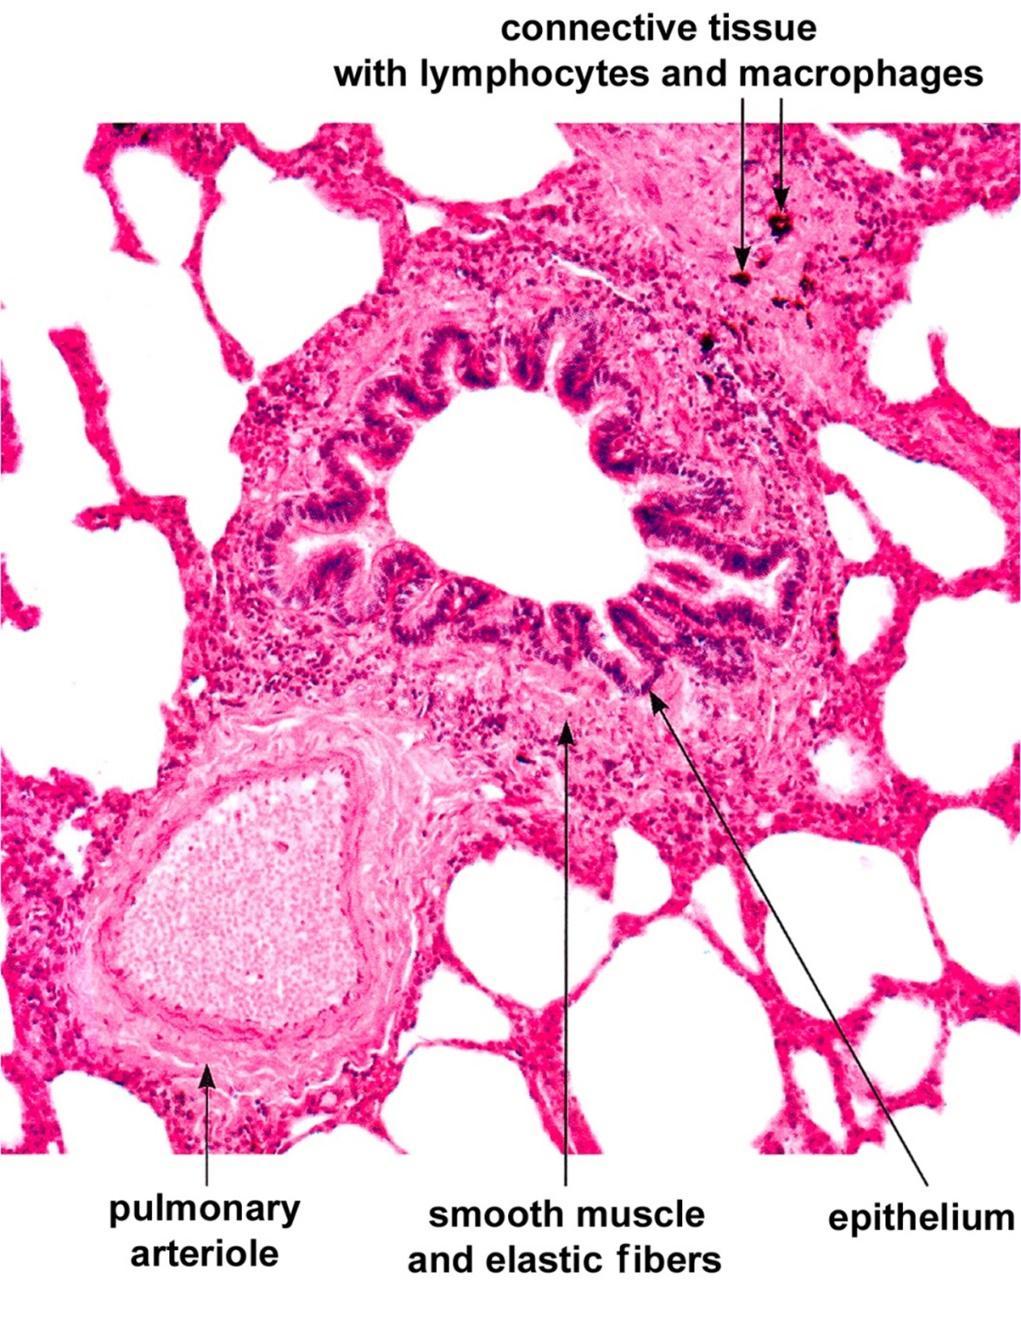 Bronchiole Respiratory passage smaller than 1 mm Does not contain cartilage Its epithelium is simple columnar The epithelium is not folded when alive, the characteristic folding is a histological